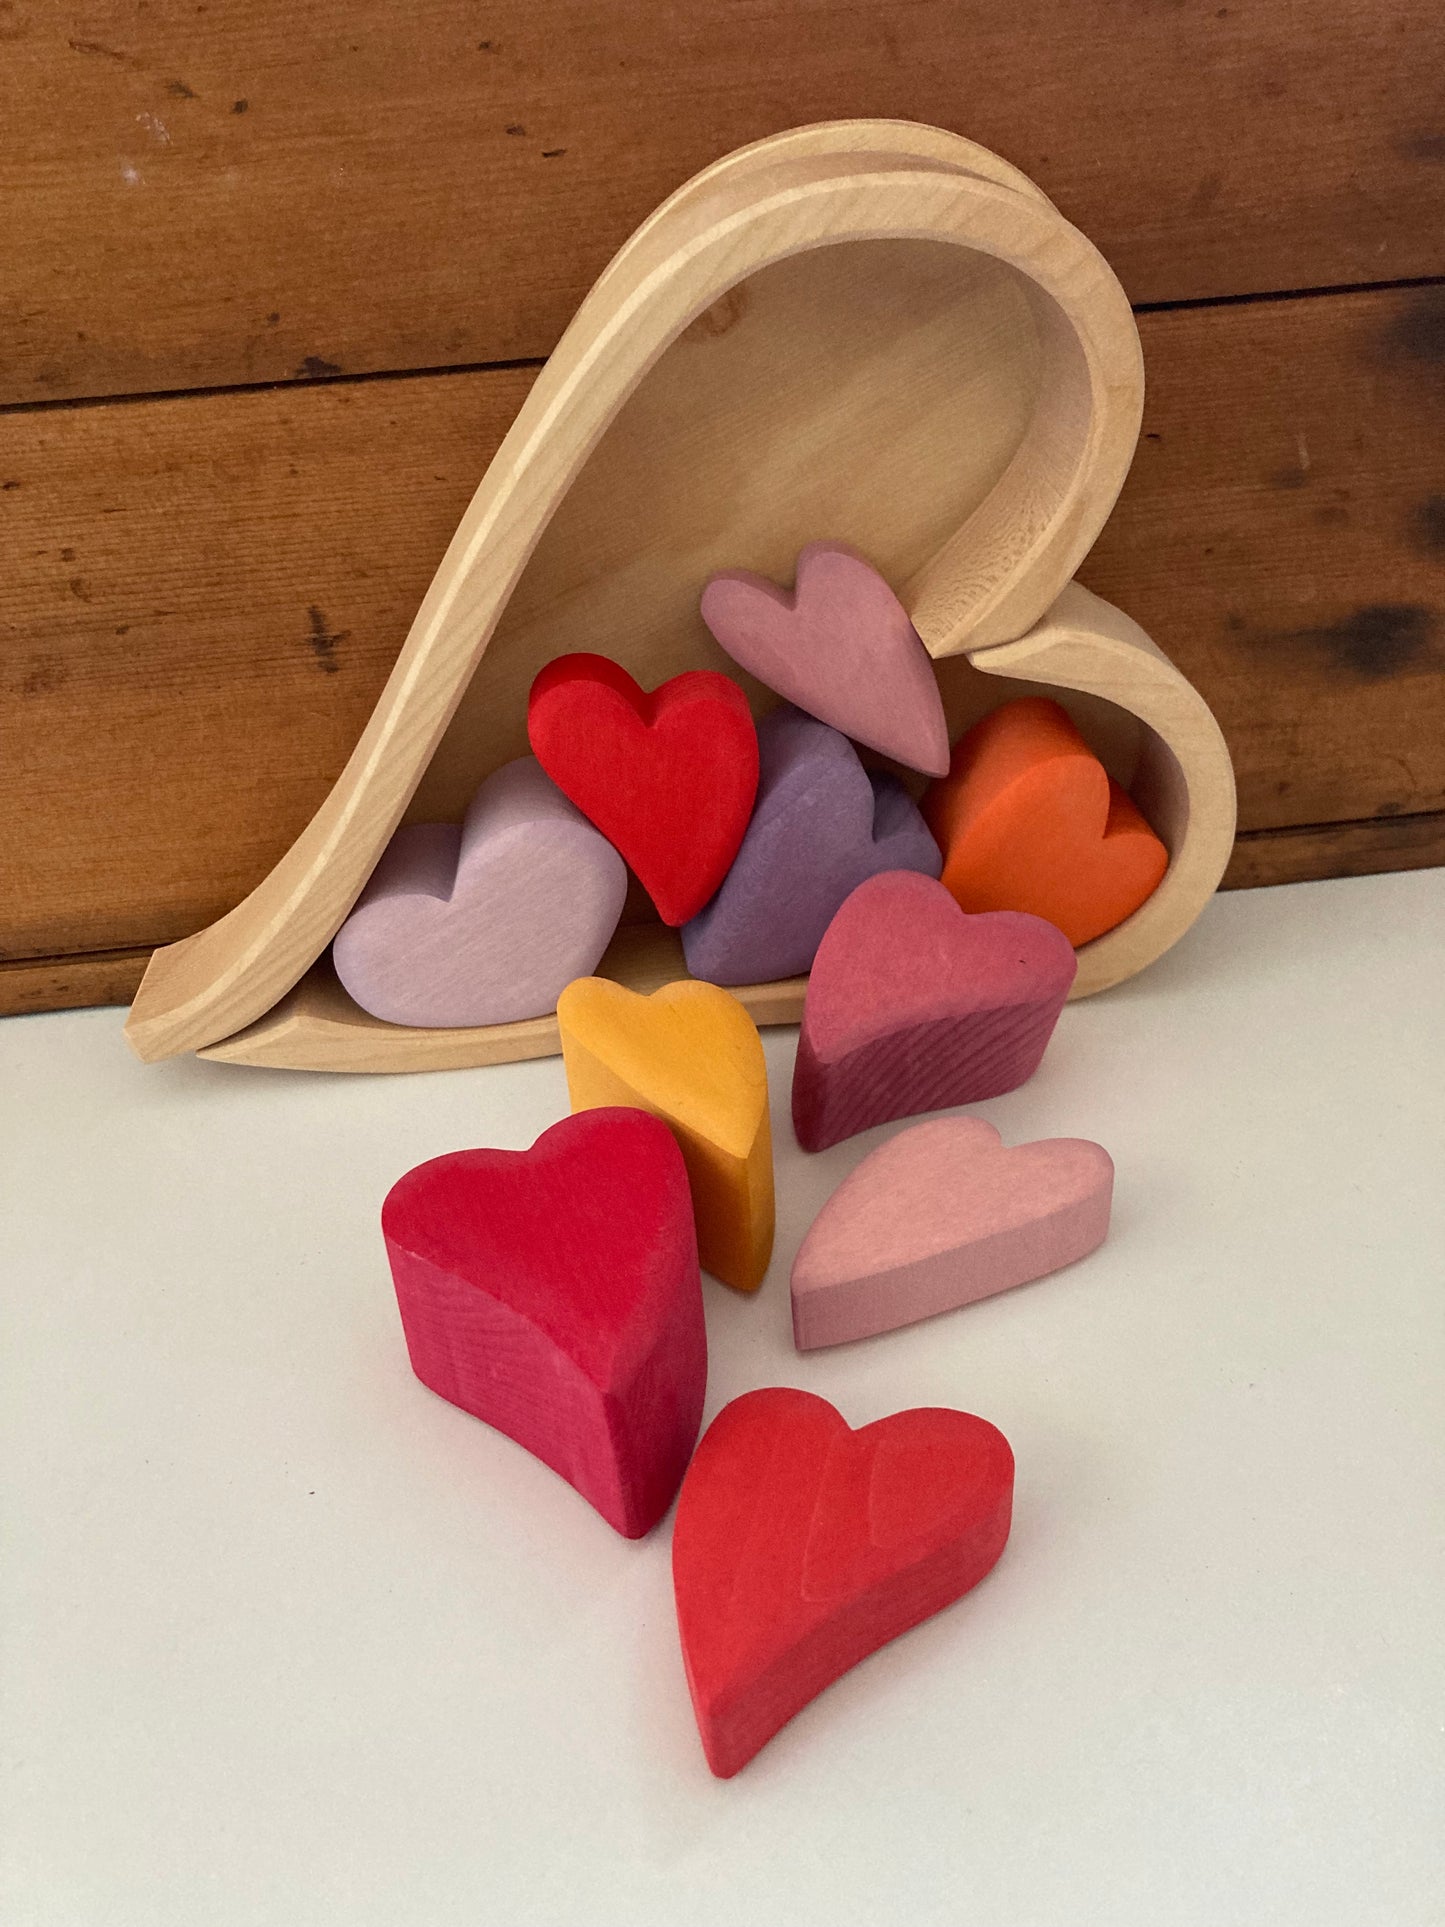 Wooden Toy - Grimm's RED HEARTS BLOCKS Building set, 10 hearts!